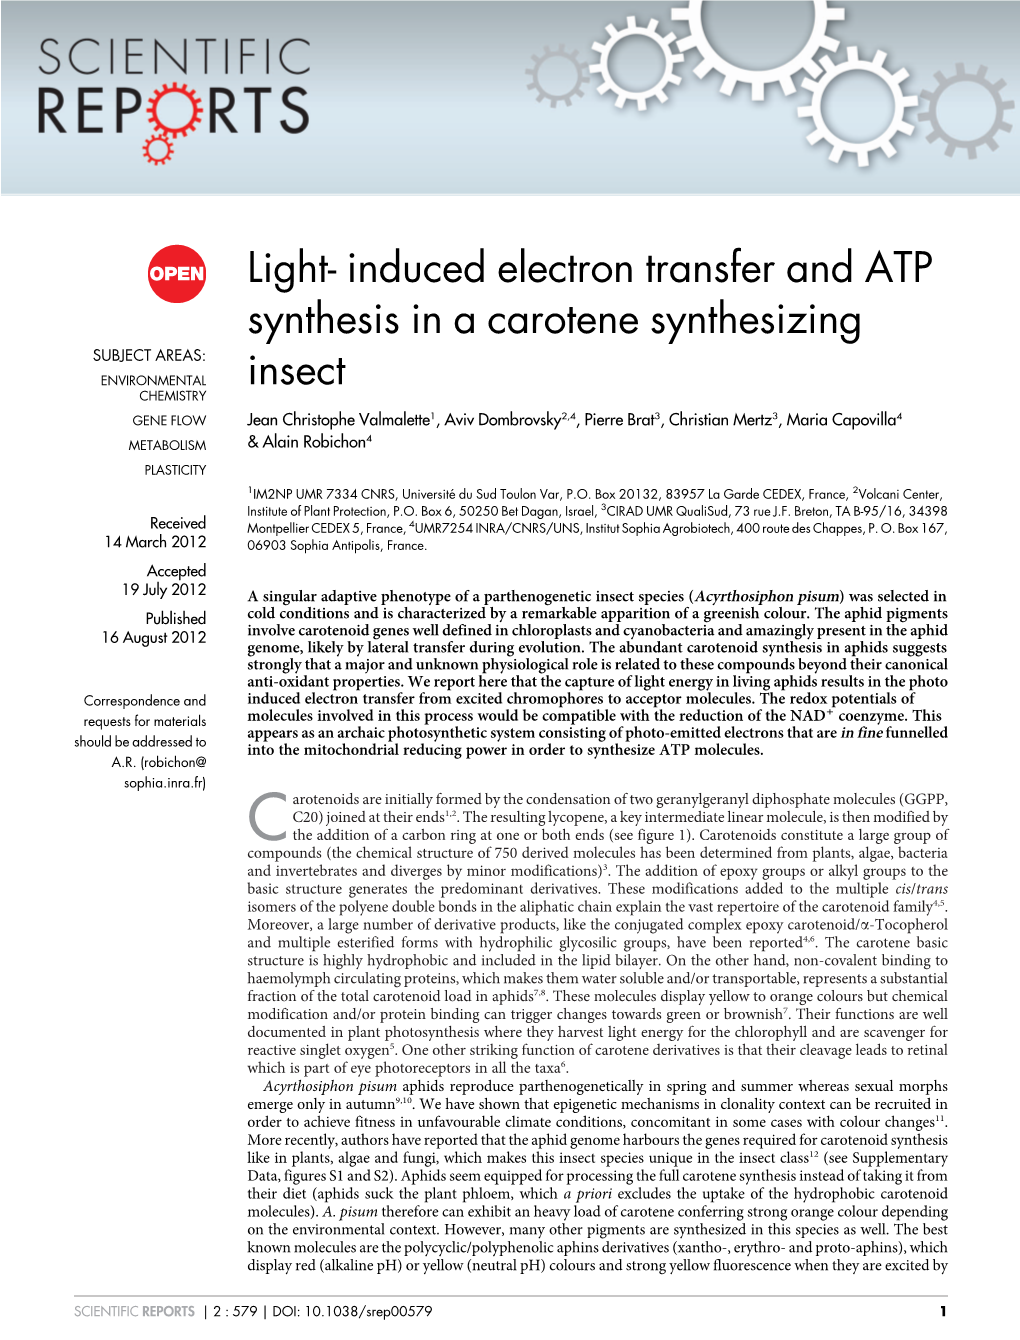 Induced Electron Transfer and ATP Synthesis in a Carotene Synthesizing Insect